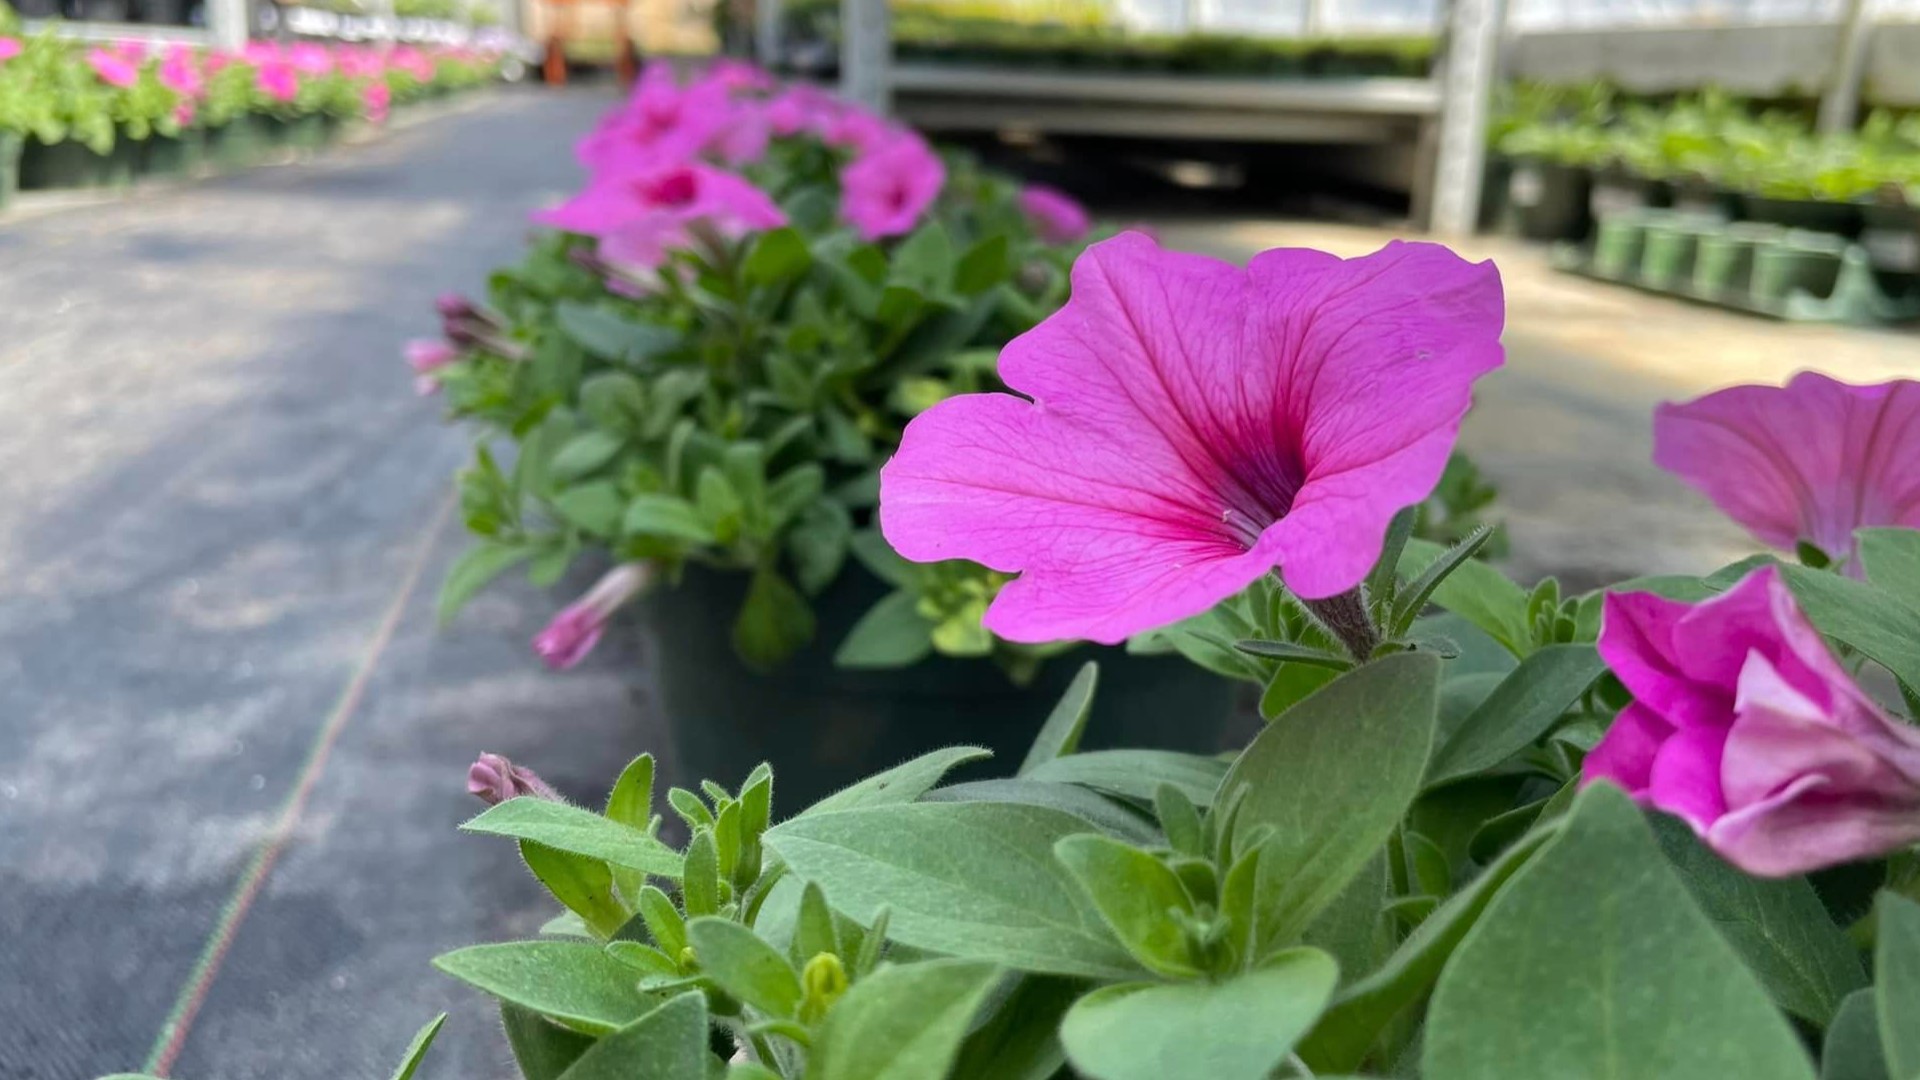 The team at Uncommon Ground grows nearly 12,000 flowers for the local PGA tournament. But all that planting has to begin months before tee-off.